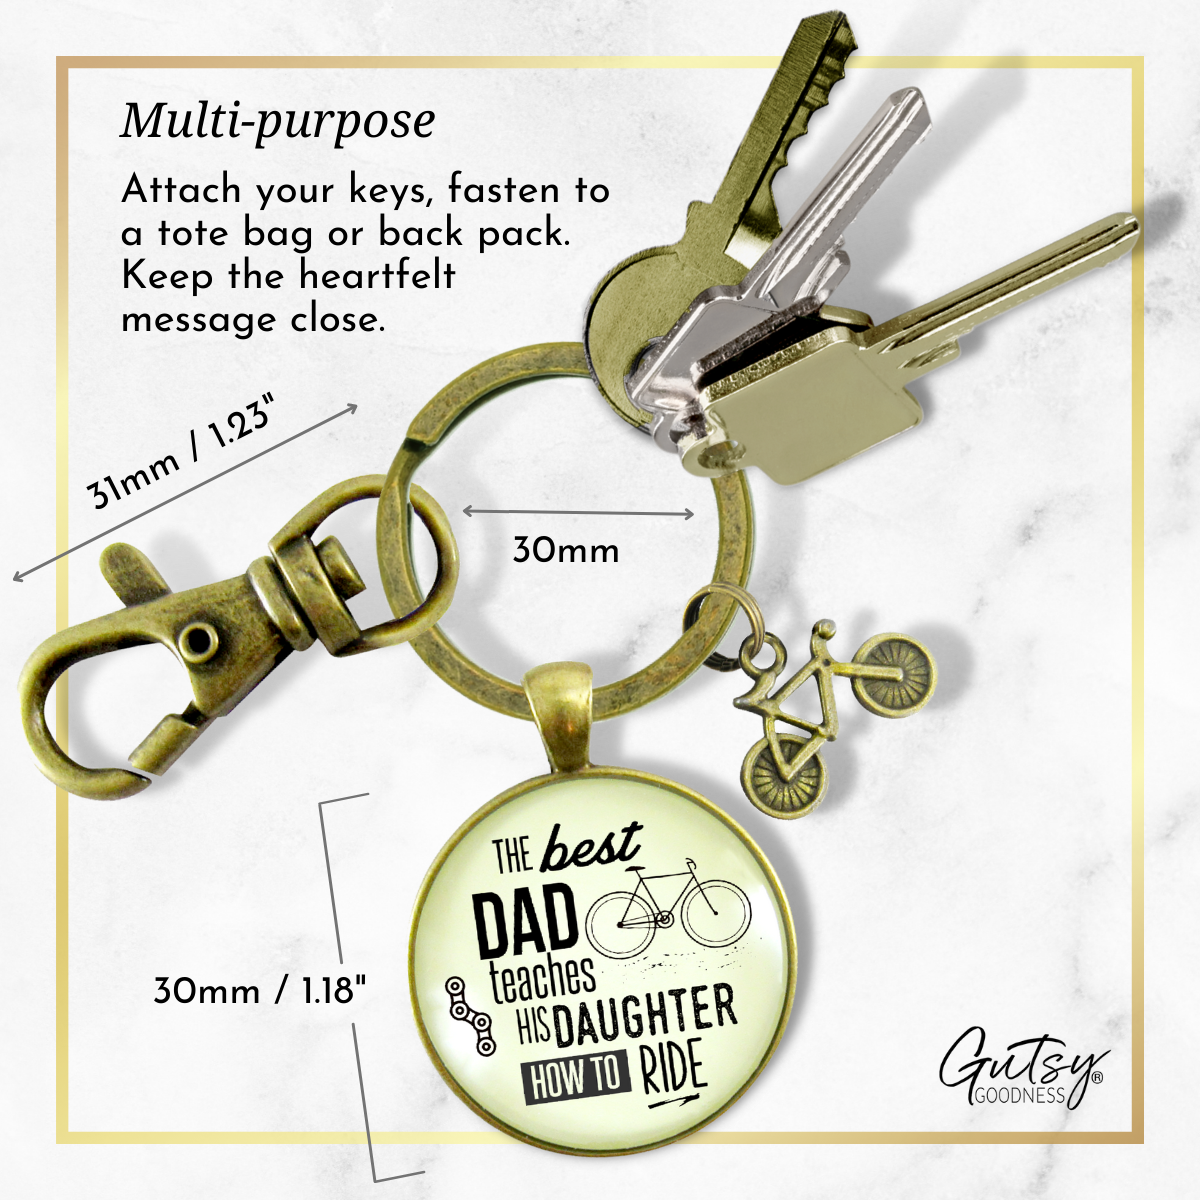 The Best Dad Teaches His Daughter How to Ride Cyclist Keychain Father From Daughter - Gutsy Goodness Handmade Jewelry;The Best Dad Teaches His Daughter How To Ride Cyclist Keychain Father From Daughter - Gutsy Goodness Handmade Jewelry Gifts